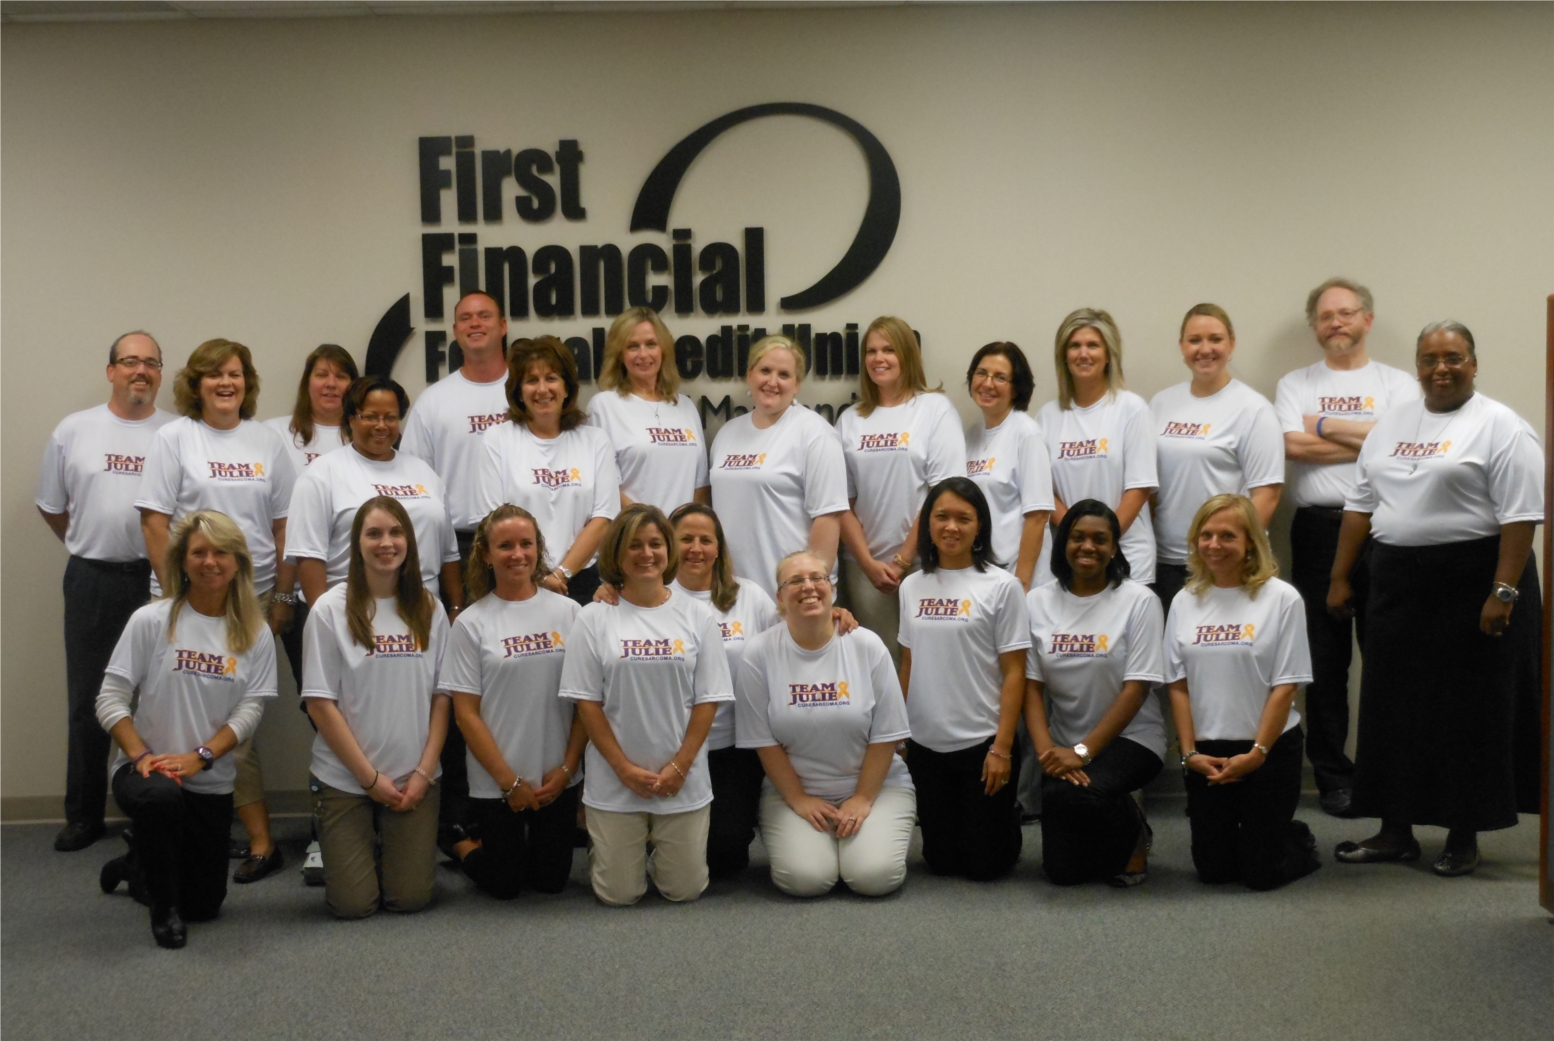 "Team Julie Day" at FFFCU, supporting an employee with sarcoma cancer.